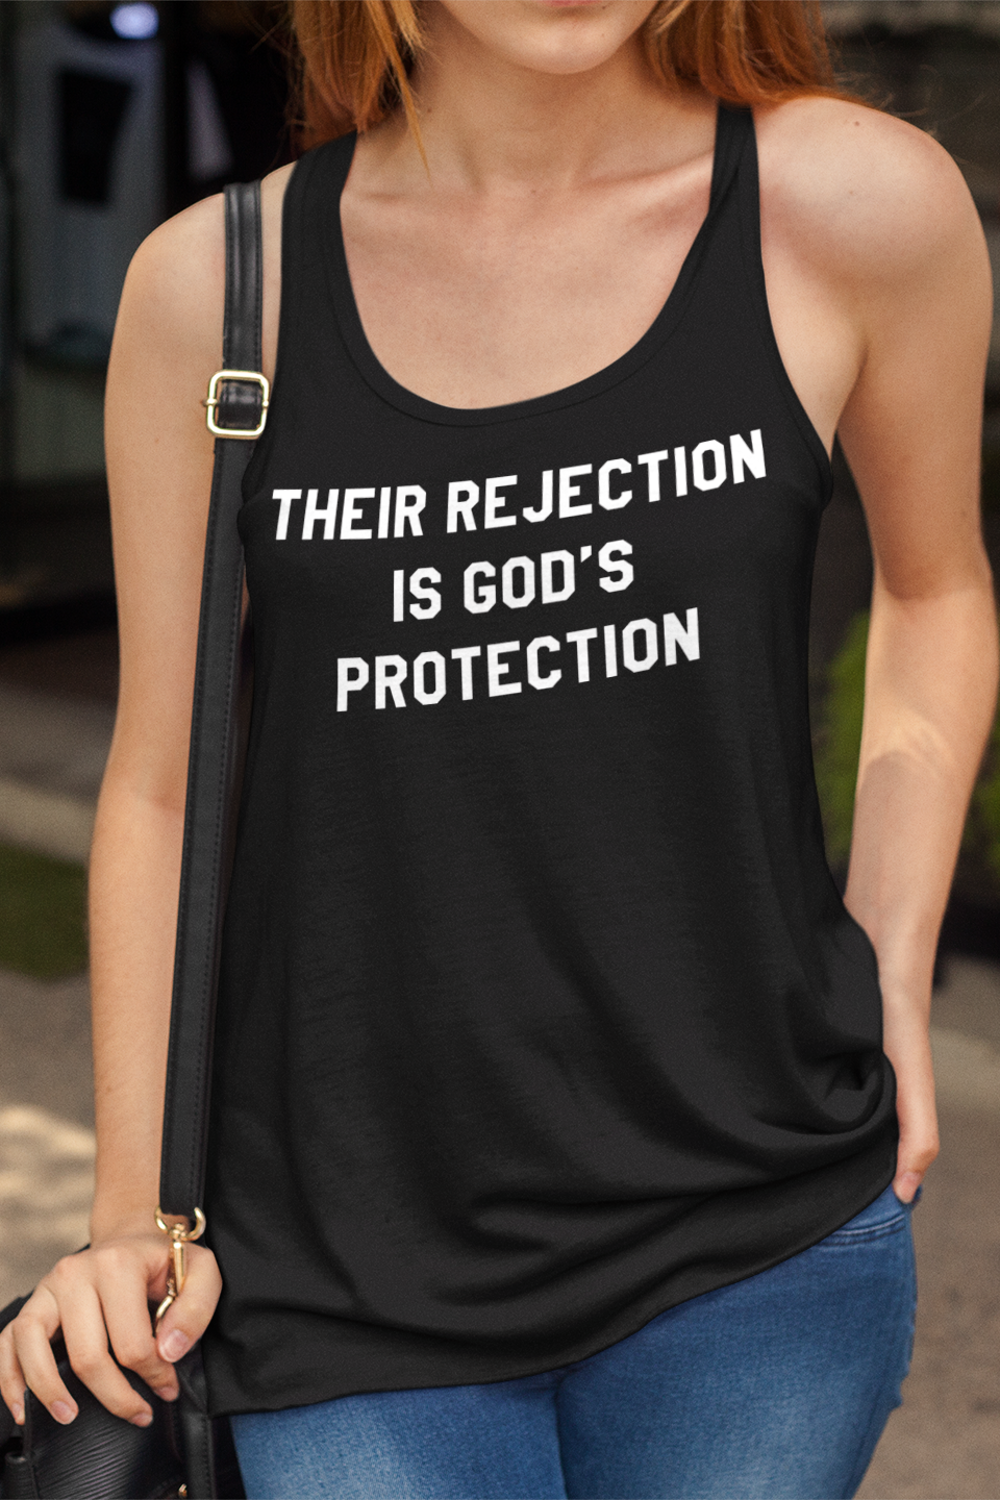 Their Rejection Is God's Protection Women's Cut Racerback Tank Top